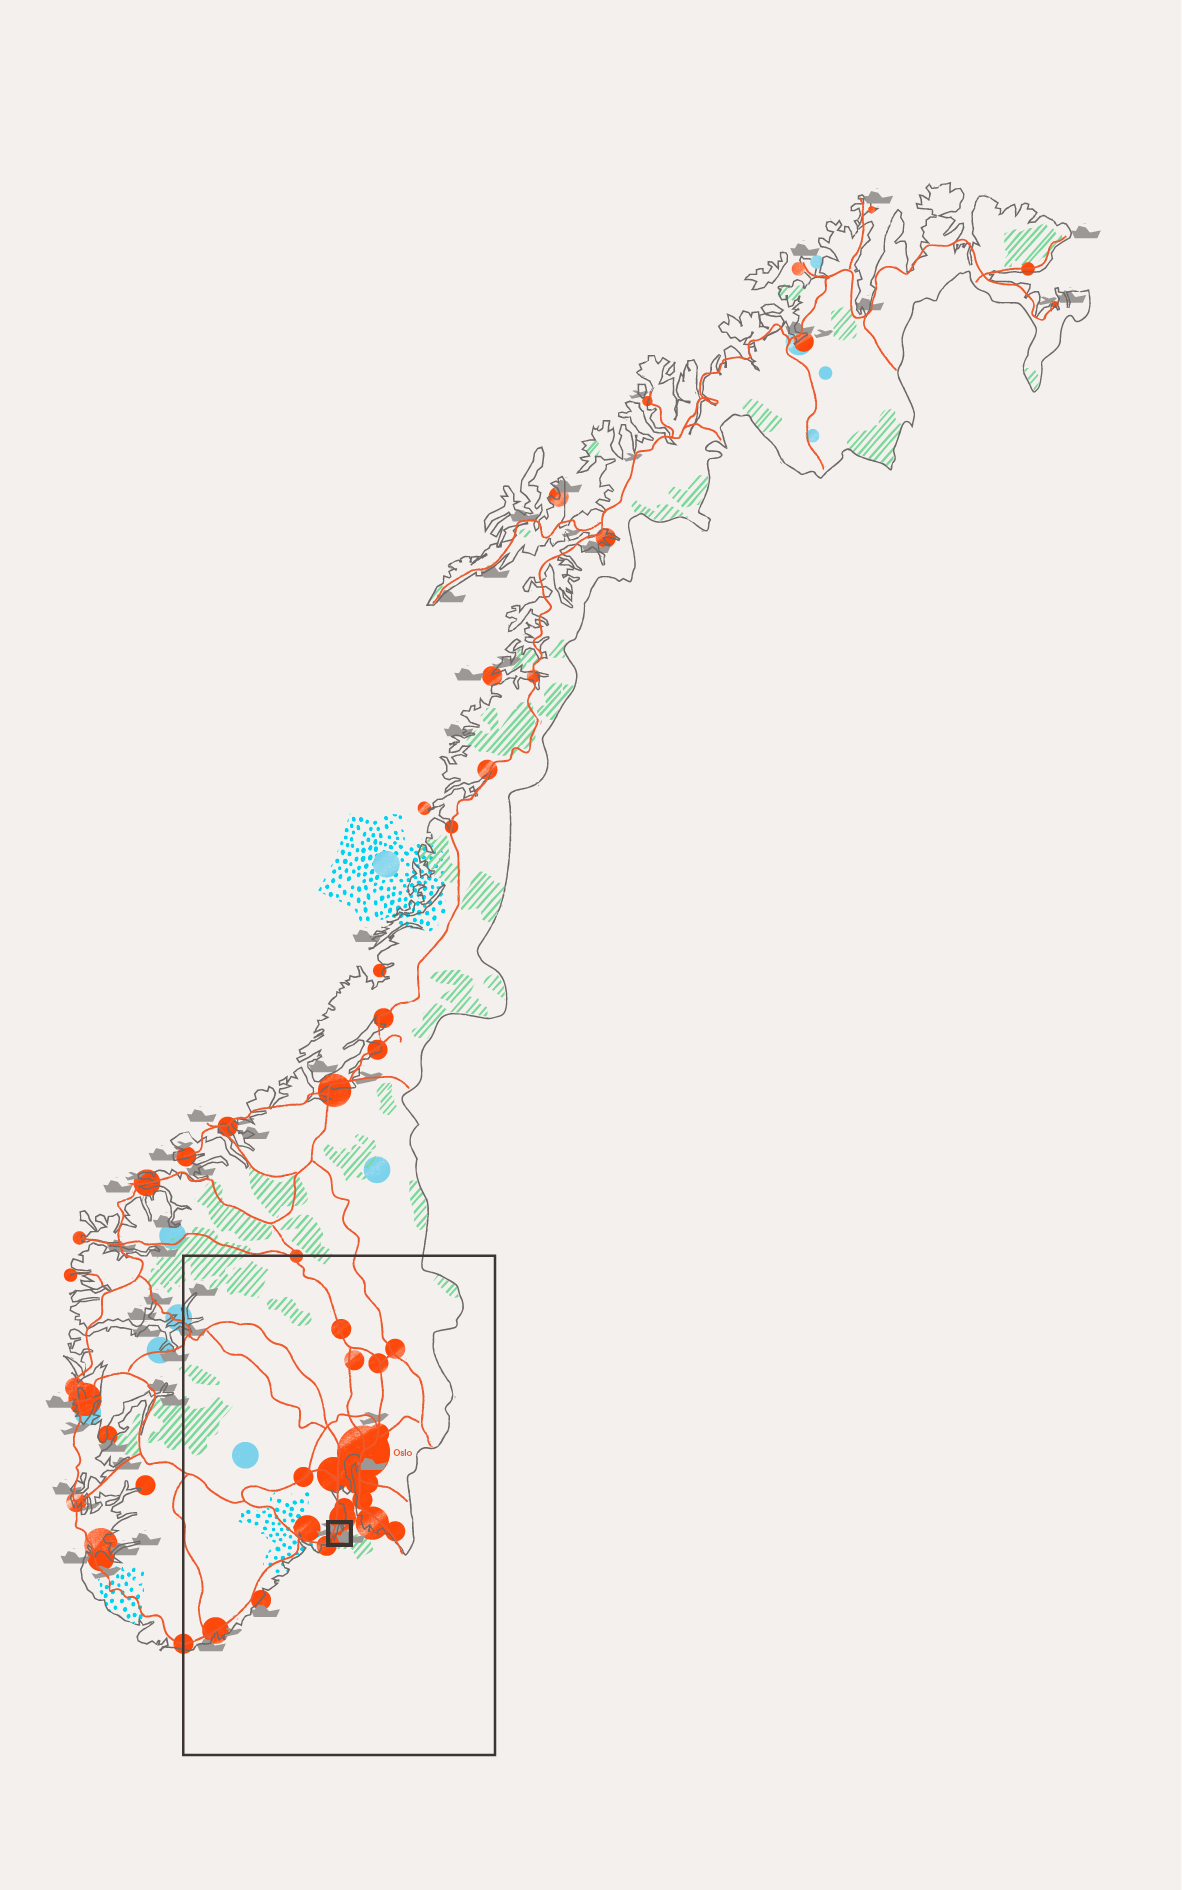 Map of Norway, illustration.